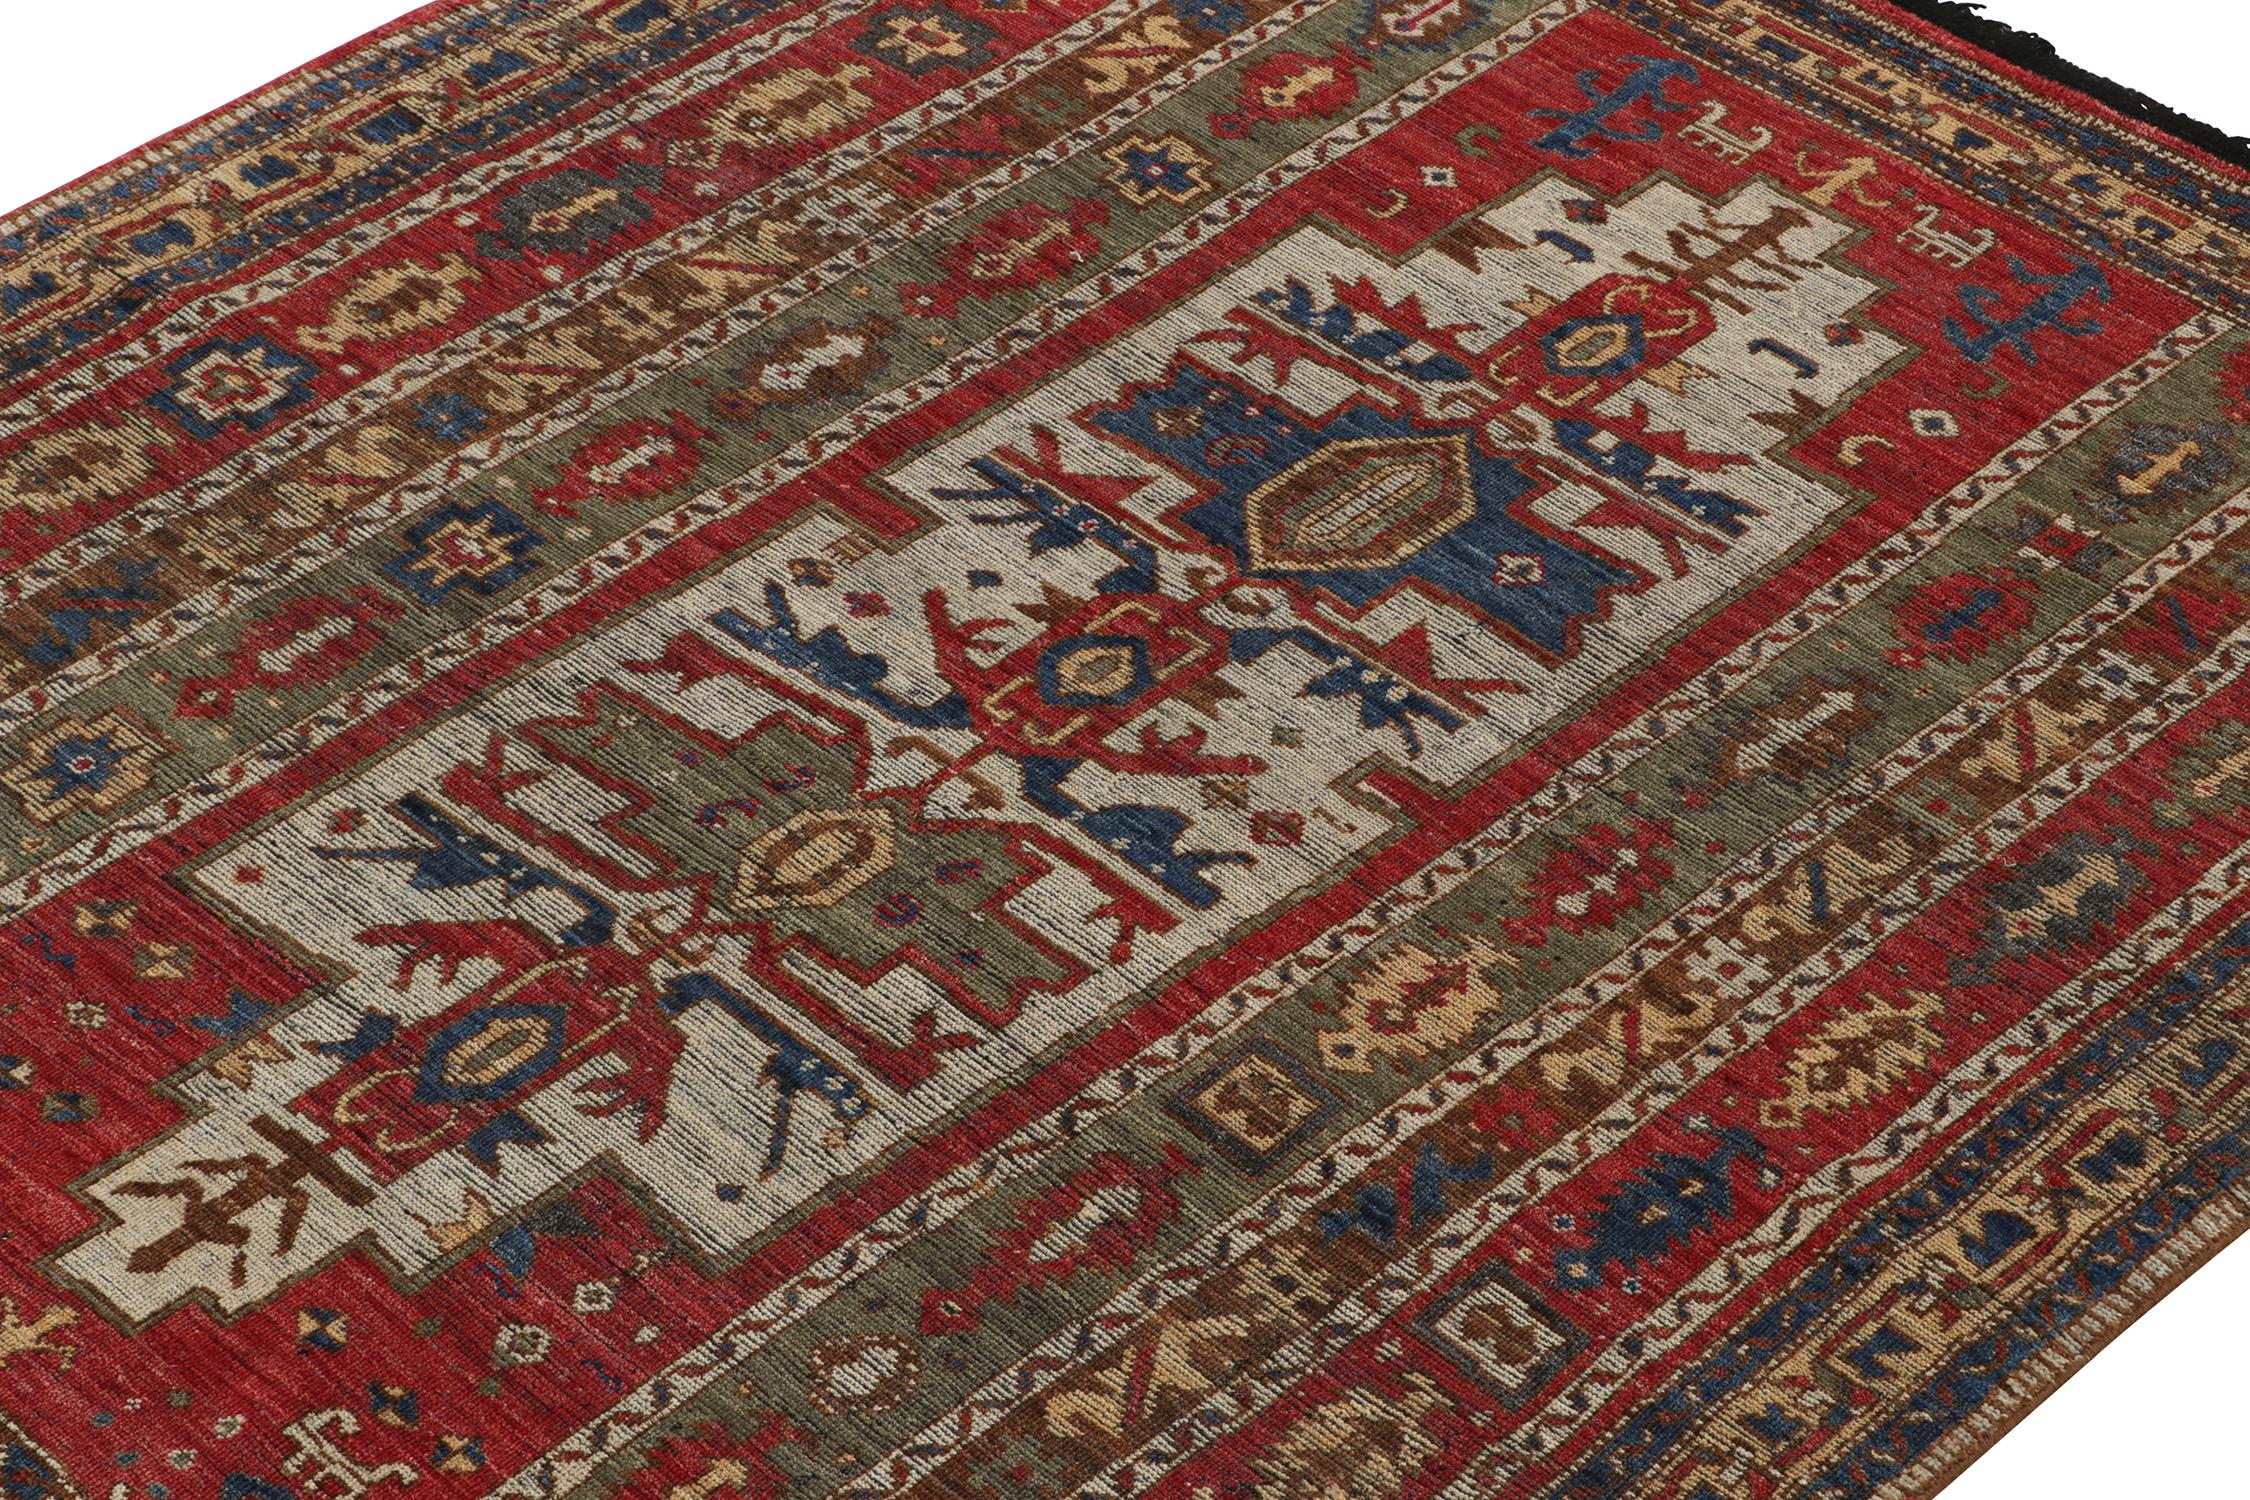 Hand-Knotted Rug & Kilim’s Tribal Style Rug in Red, Green and Blue Geometric Patterns For Sale